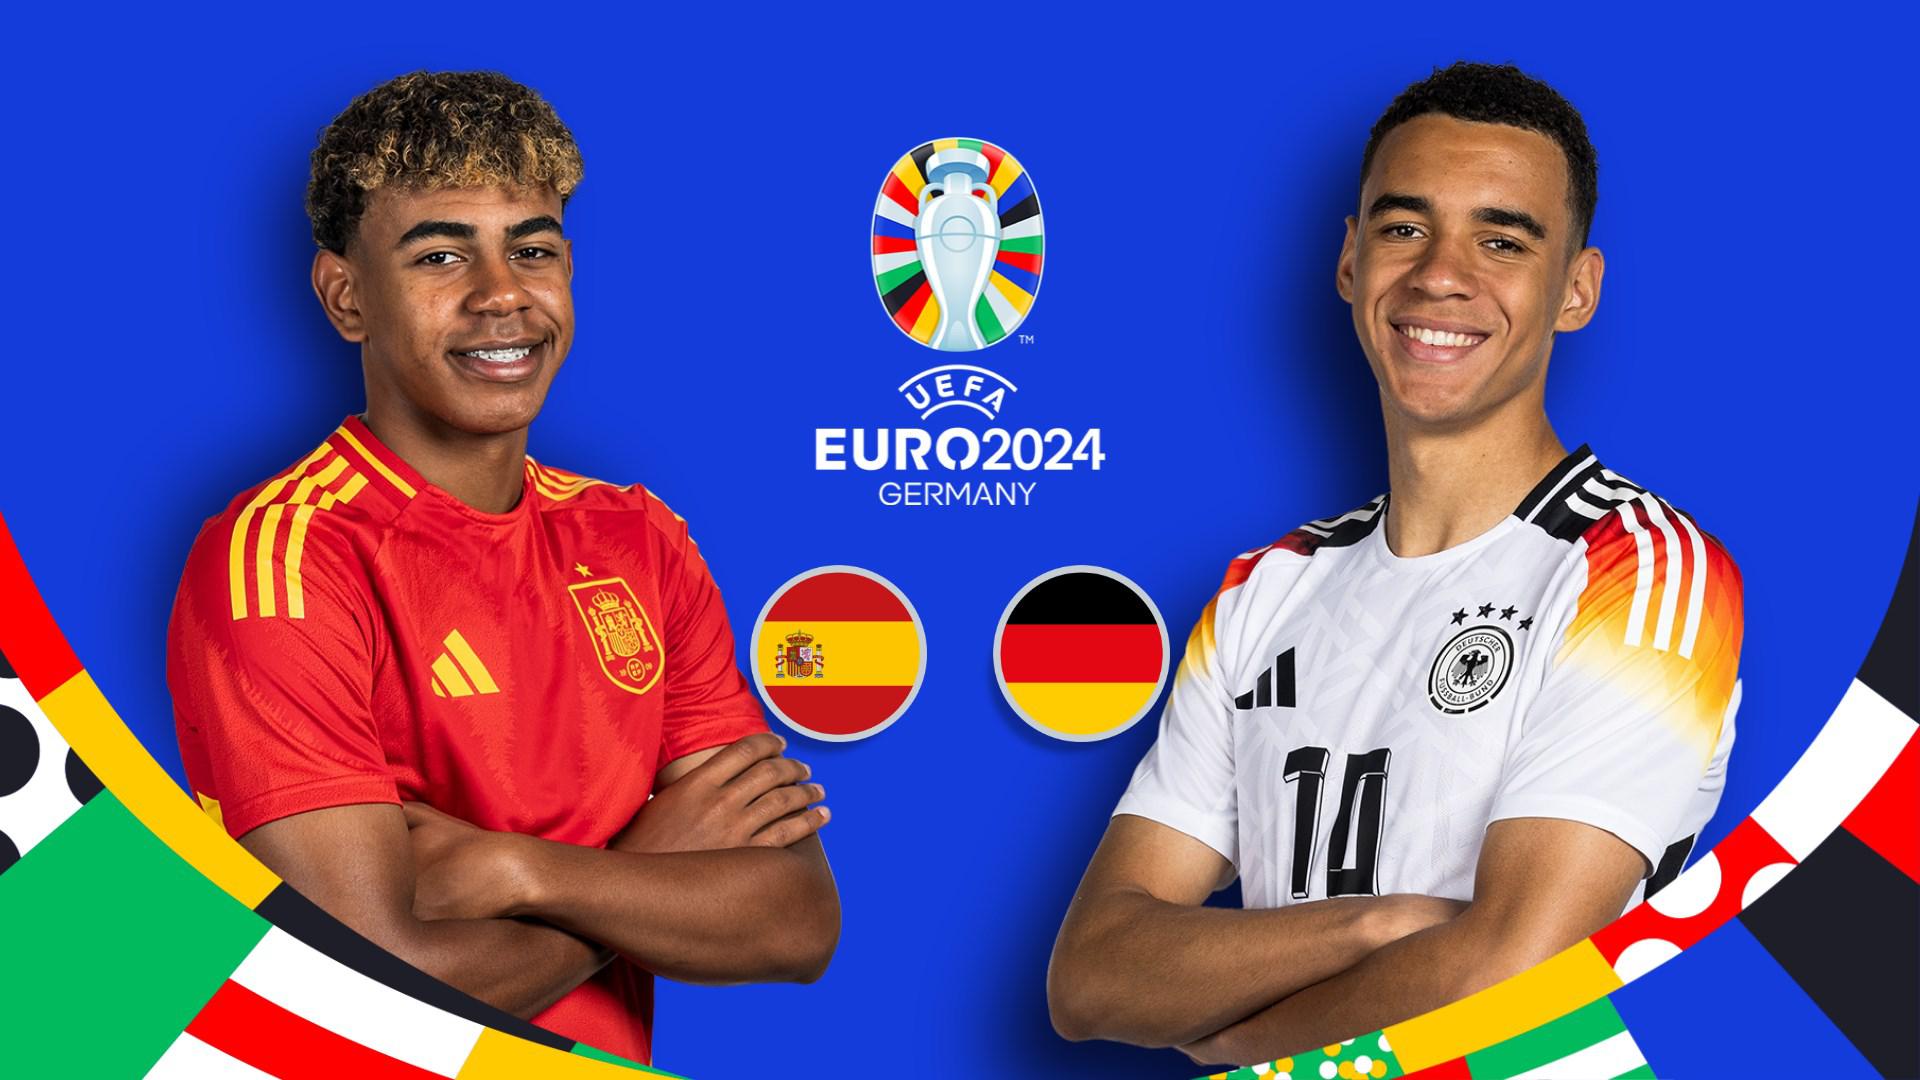 Match Preview: Spain vs Germany - Euro Games